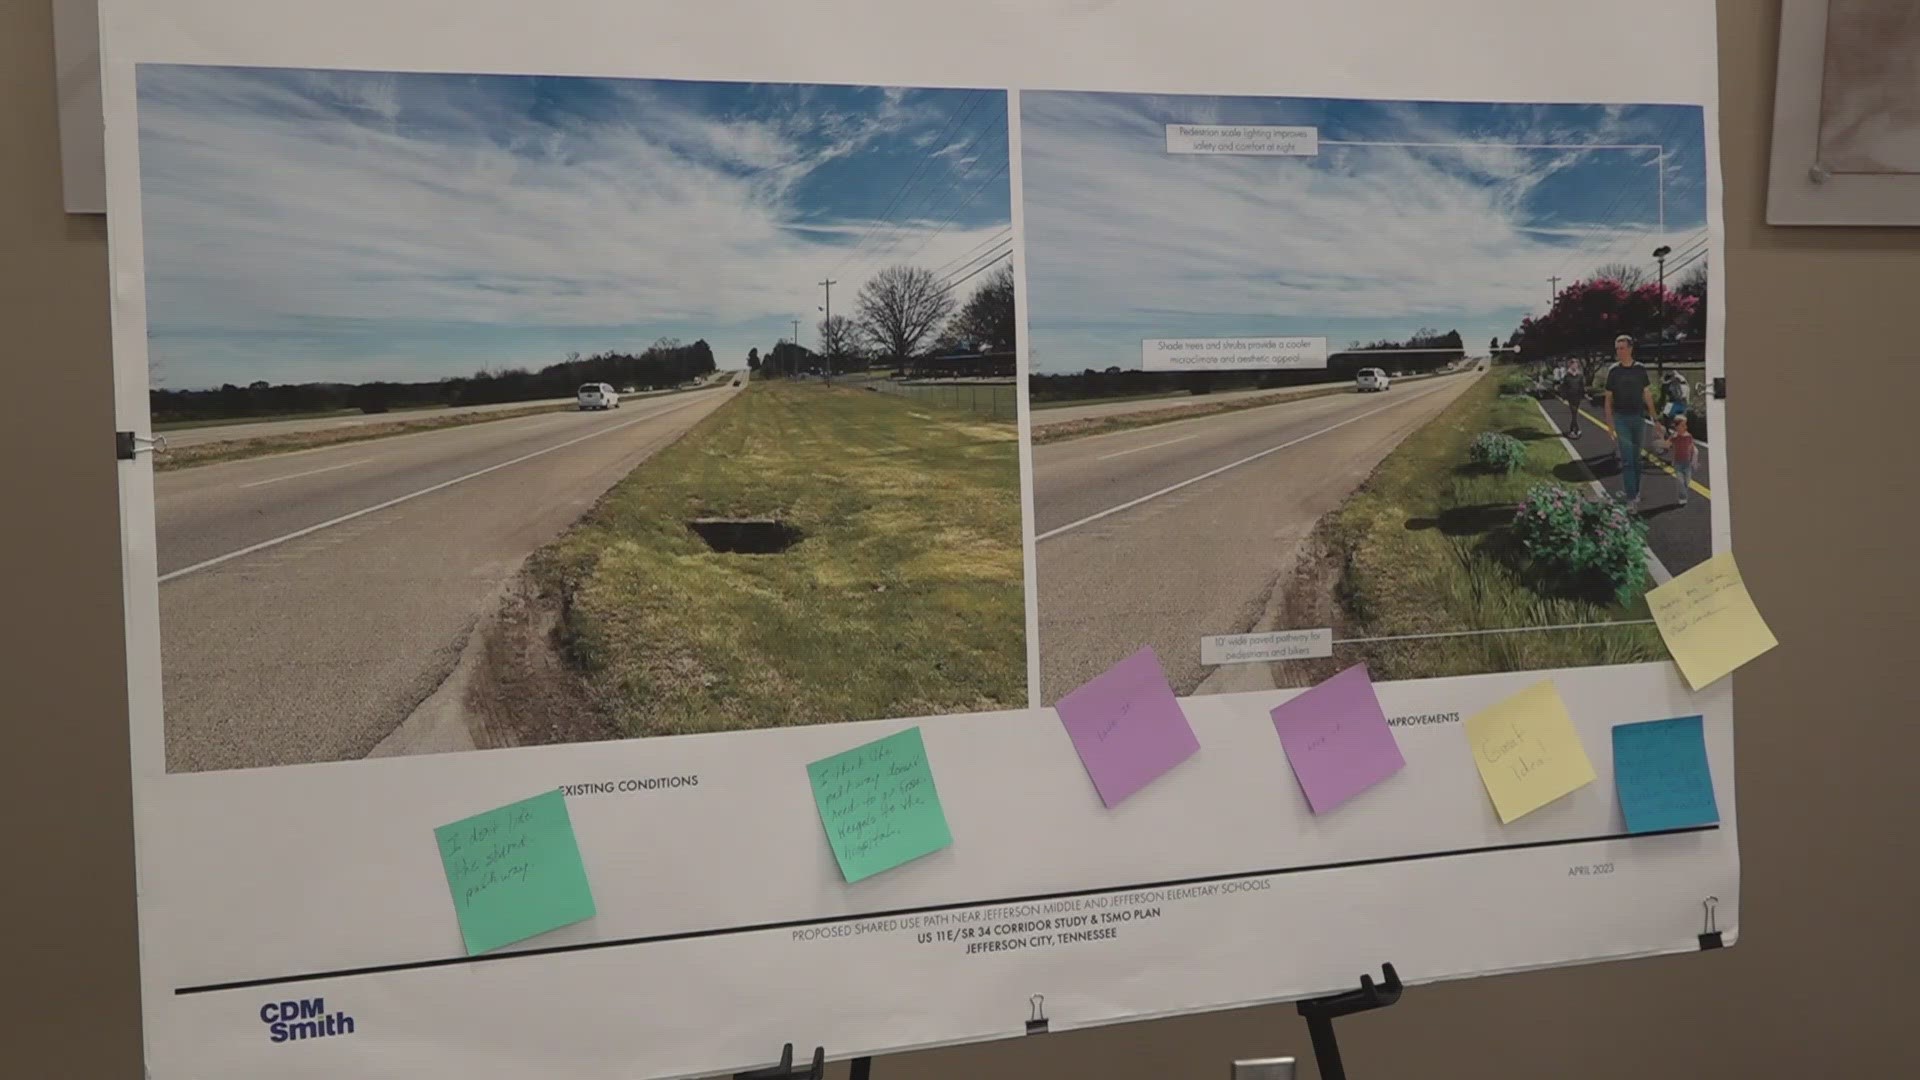 The project would focus on improving safety along a section of the highway in Jefferson City.